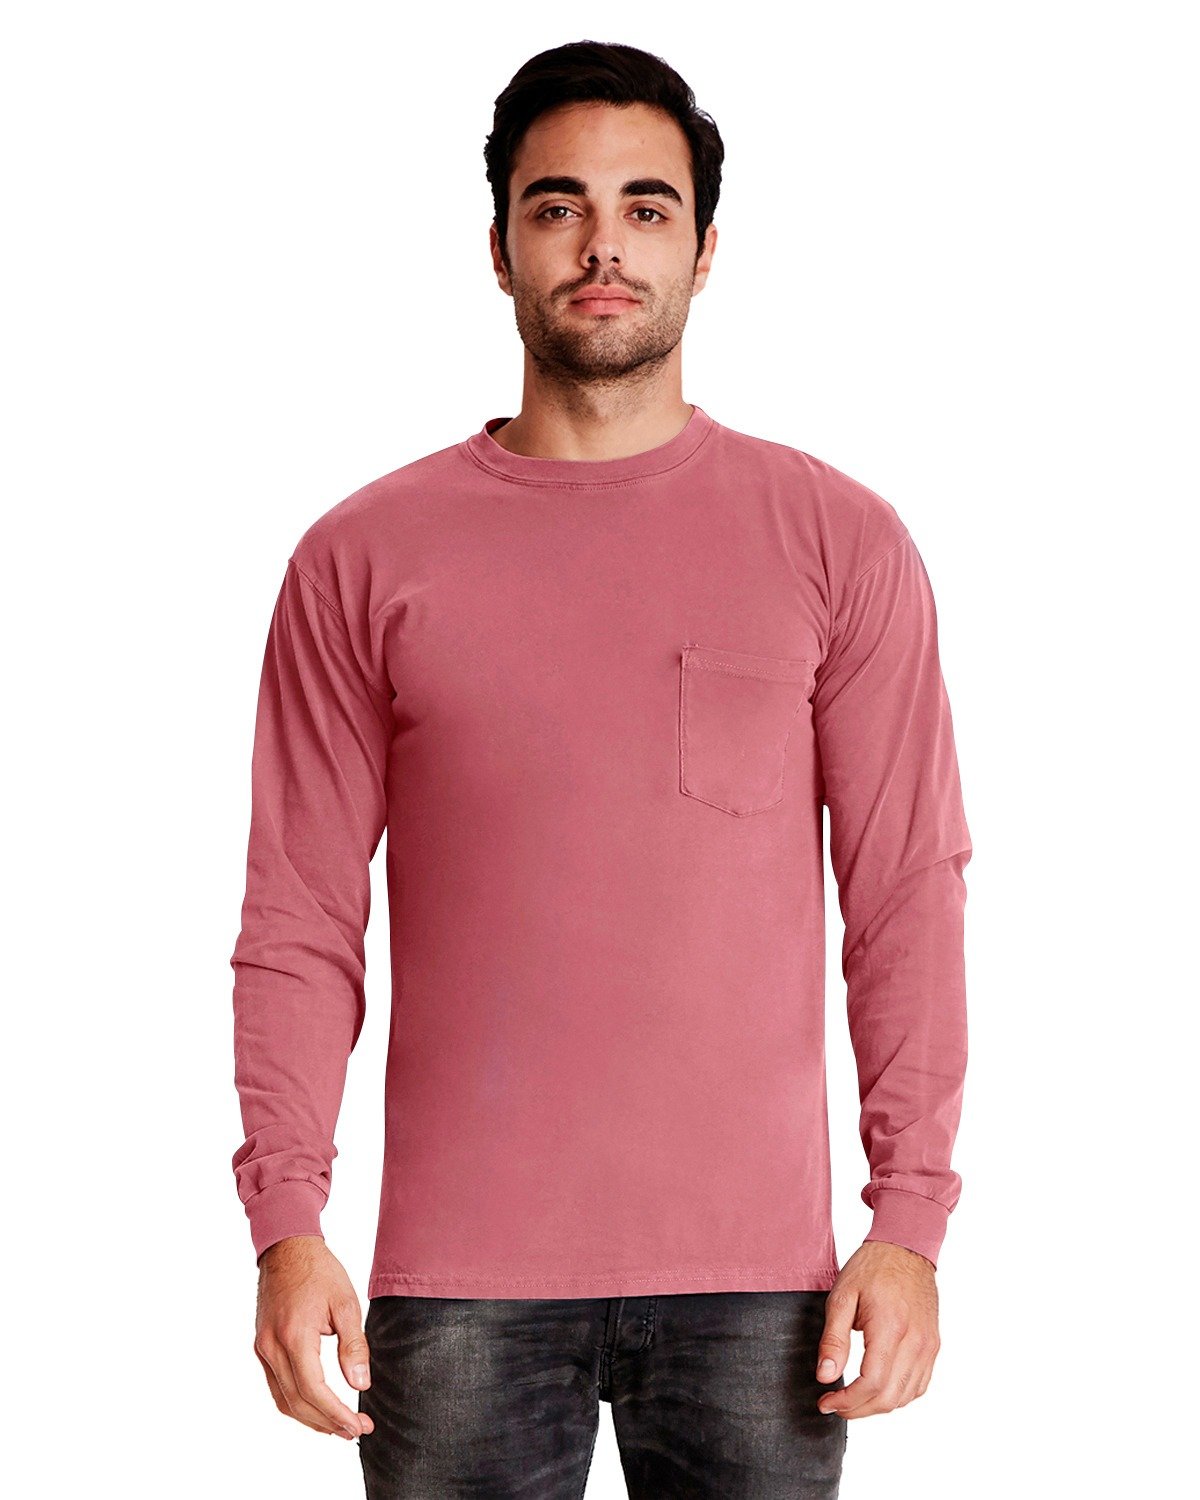 Adult Inspired Dye Long-Sleeve Crew with Pocket - Apparel Globe